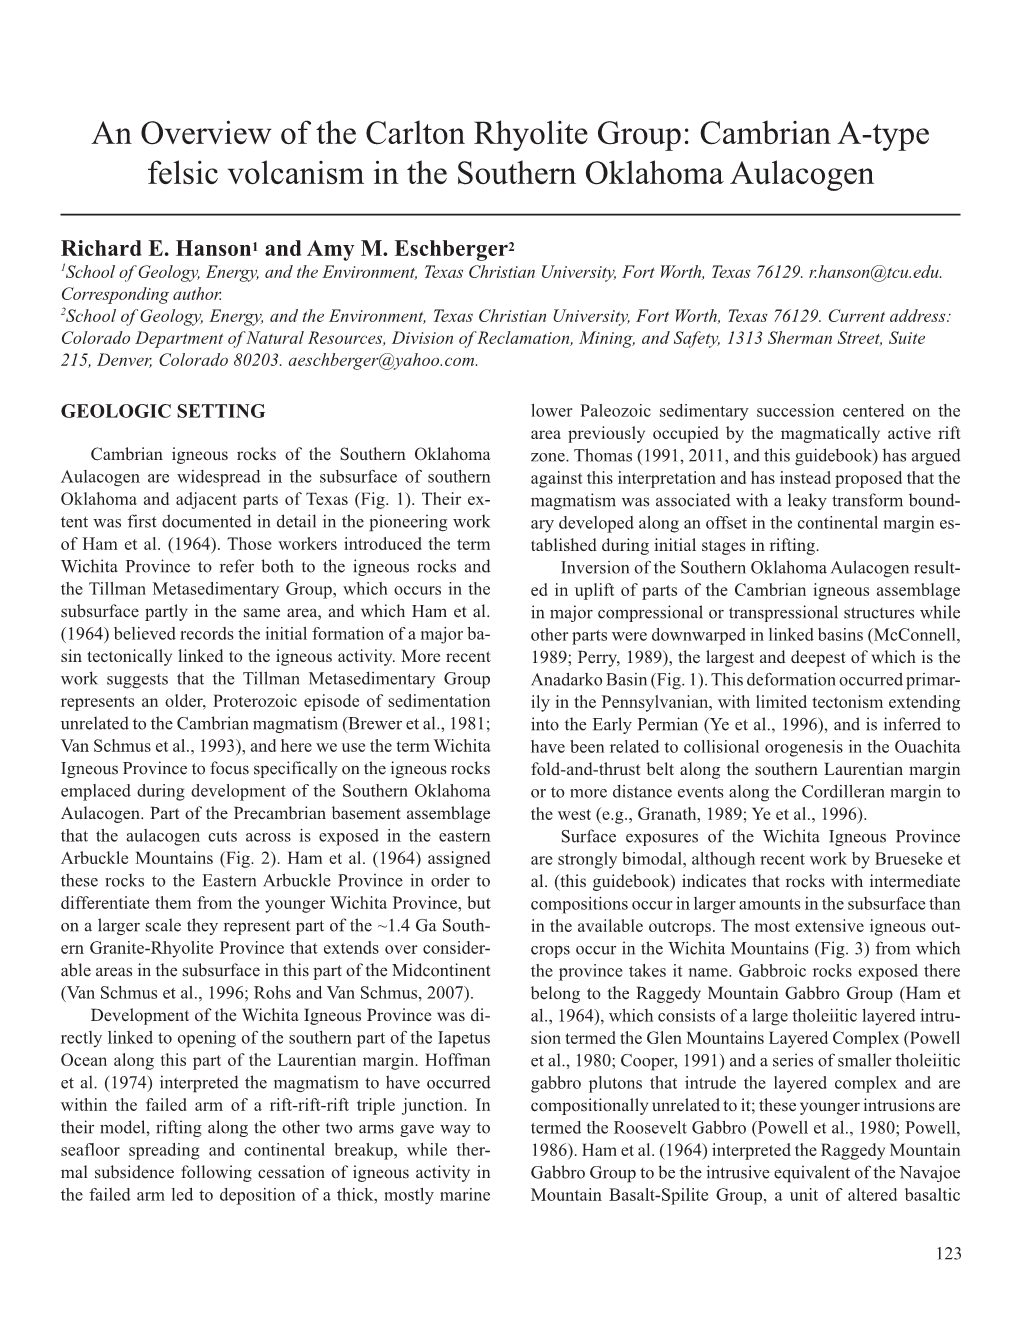 An Overview of the Carlton Rhyolite Group: Cambrian A-Type Felsic Volcanism in the Southern Oklahoma Aulacogen